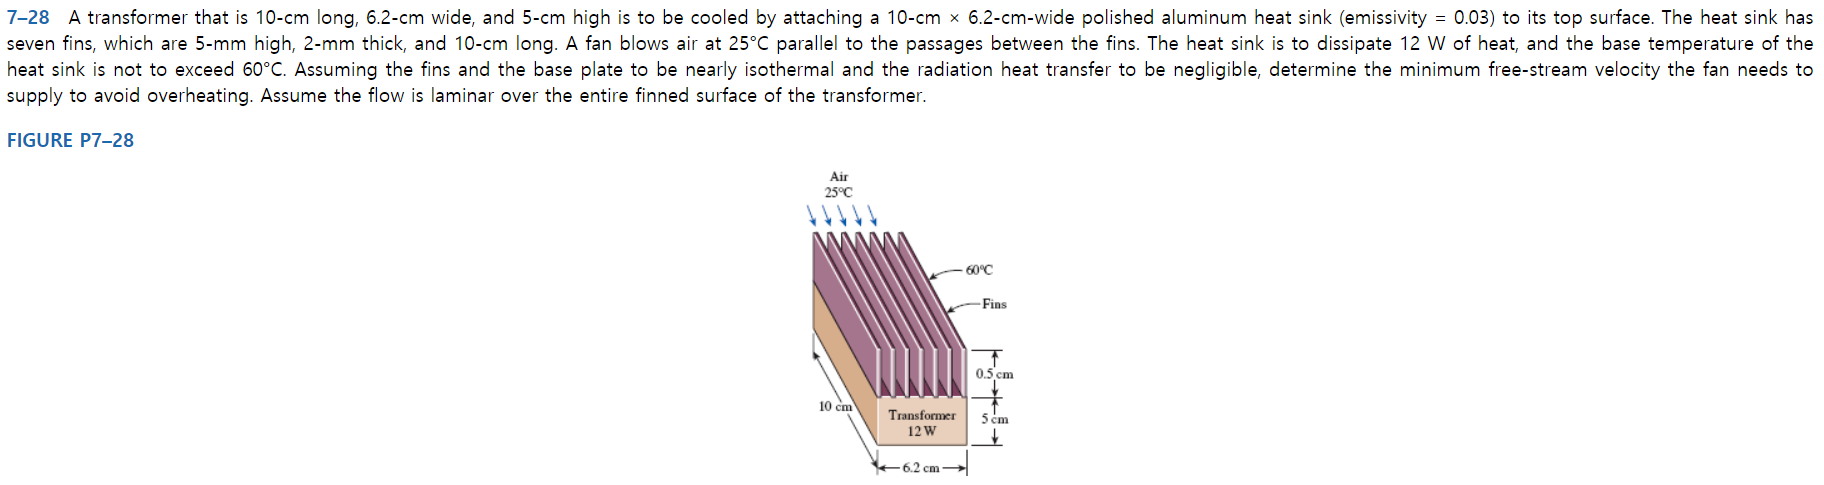 7-28 A transformer that is 10-cm long, 6.2-cm wide, and 5-cm high is to be cooled by attaching a 10-cm x 6.2-cm-wide polished aluminum heat sink (emissivity = 0.03) to its top surface. The heat sink has
seven fins, which are 5-mm high, 2-mm thick, and 10-cm long. A fan blows air at 25°C parallel to the passages between the fins. The heat sink
heat sink is not to exceed 60°C. Assuming the fins and the base plate to be nearly isothermal and the radiation heat transfer to be negligible, determine the minimum free-stream velocity the fan needs to
supply to avoid overheating. Assume the flow is laminar over the entire finned surface of the transformer.
to dissipate 12 W of heat, and the base temperature of the
FIGURE P7-28
Air
25°C
60°C
-Fins
0.5 cm
10 cm
Transformer
5 cm
12 W
+6.2 cm -
